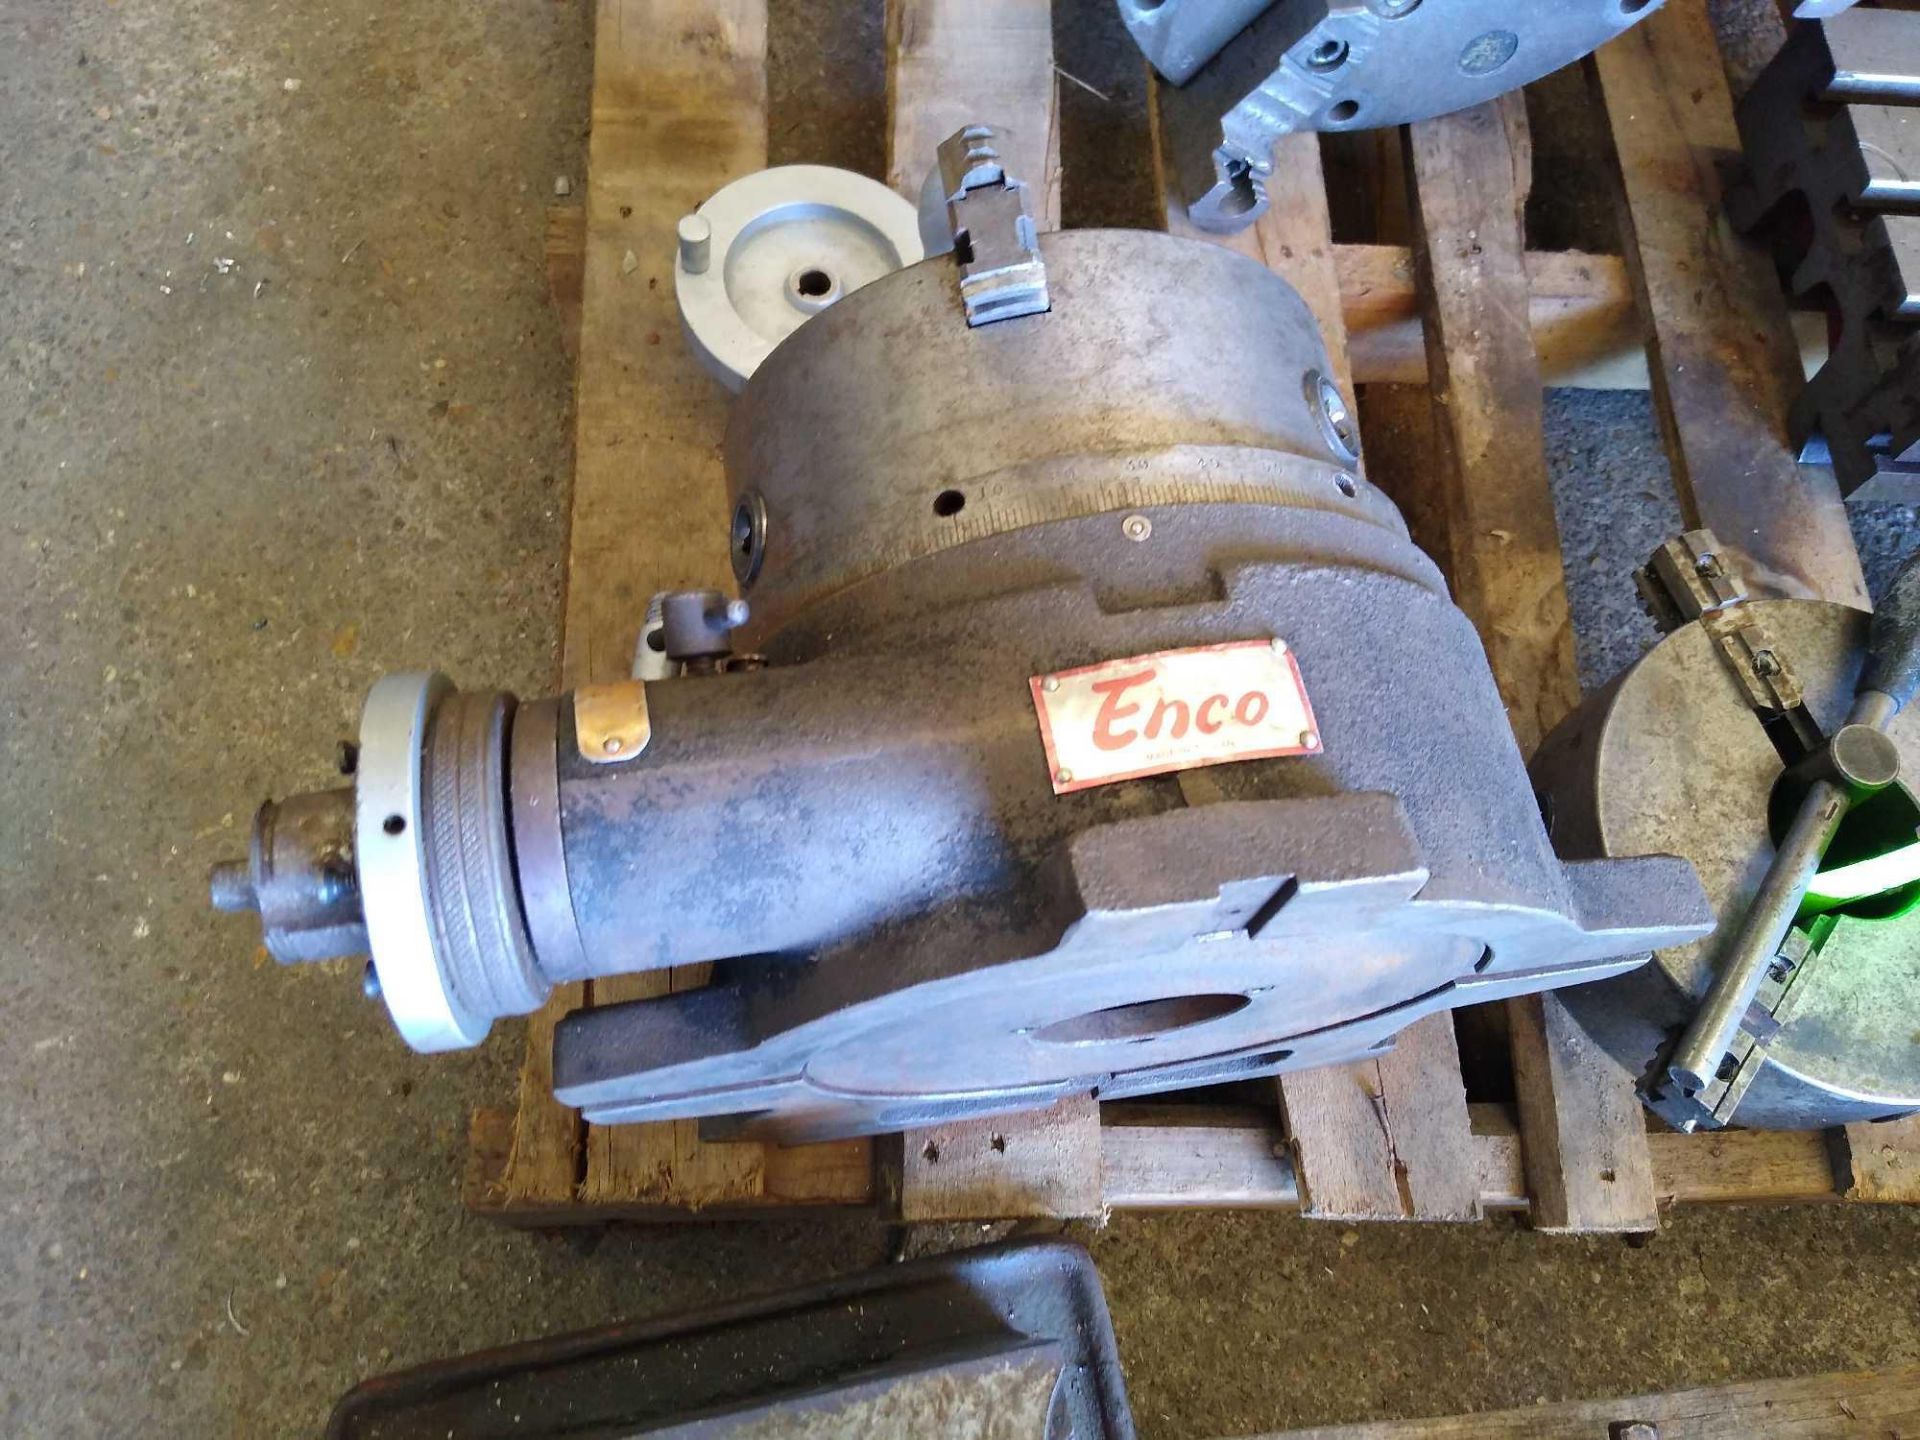 Enco Dividing Head with Tail Stock and Face Plates. 8" 3 Jaw Chuck.